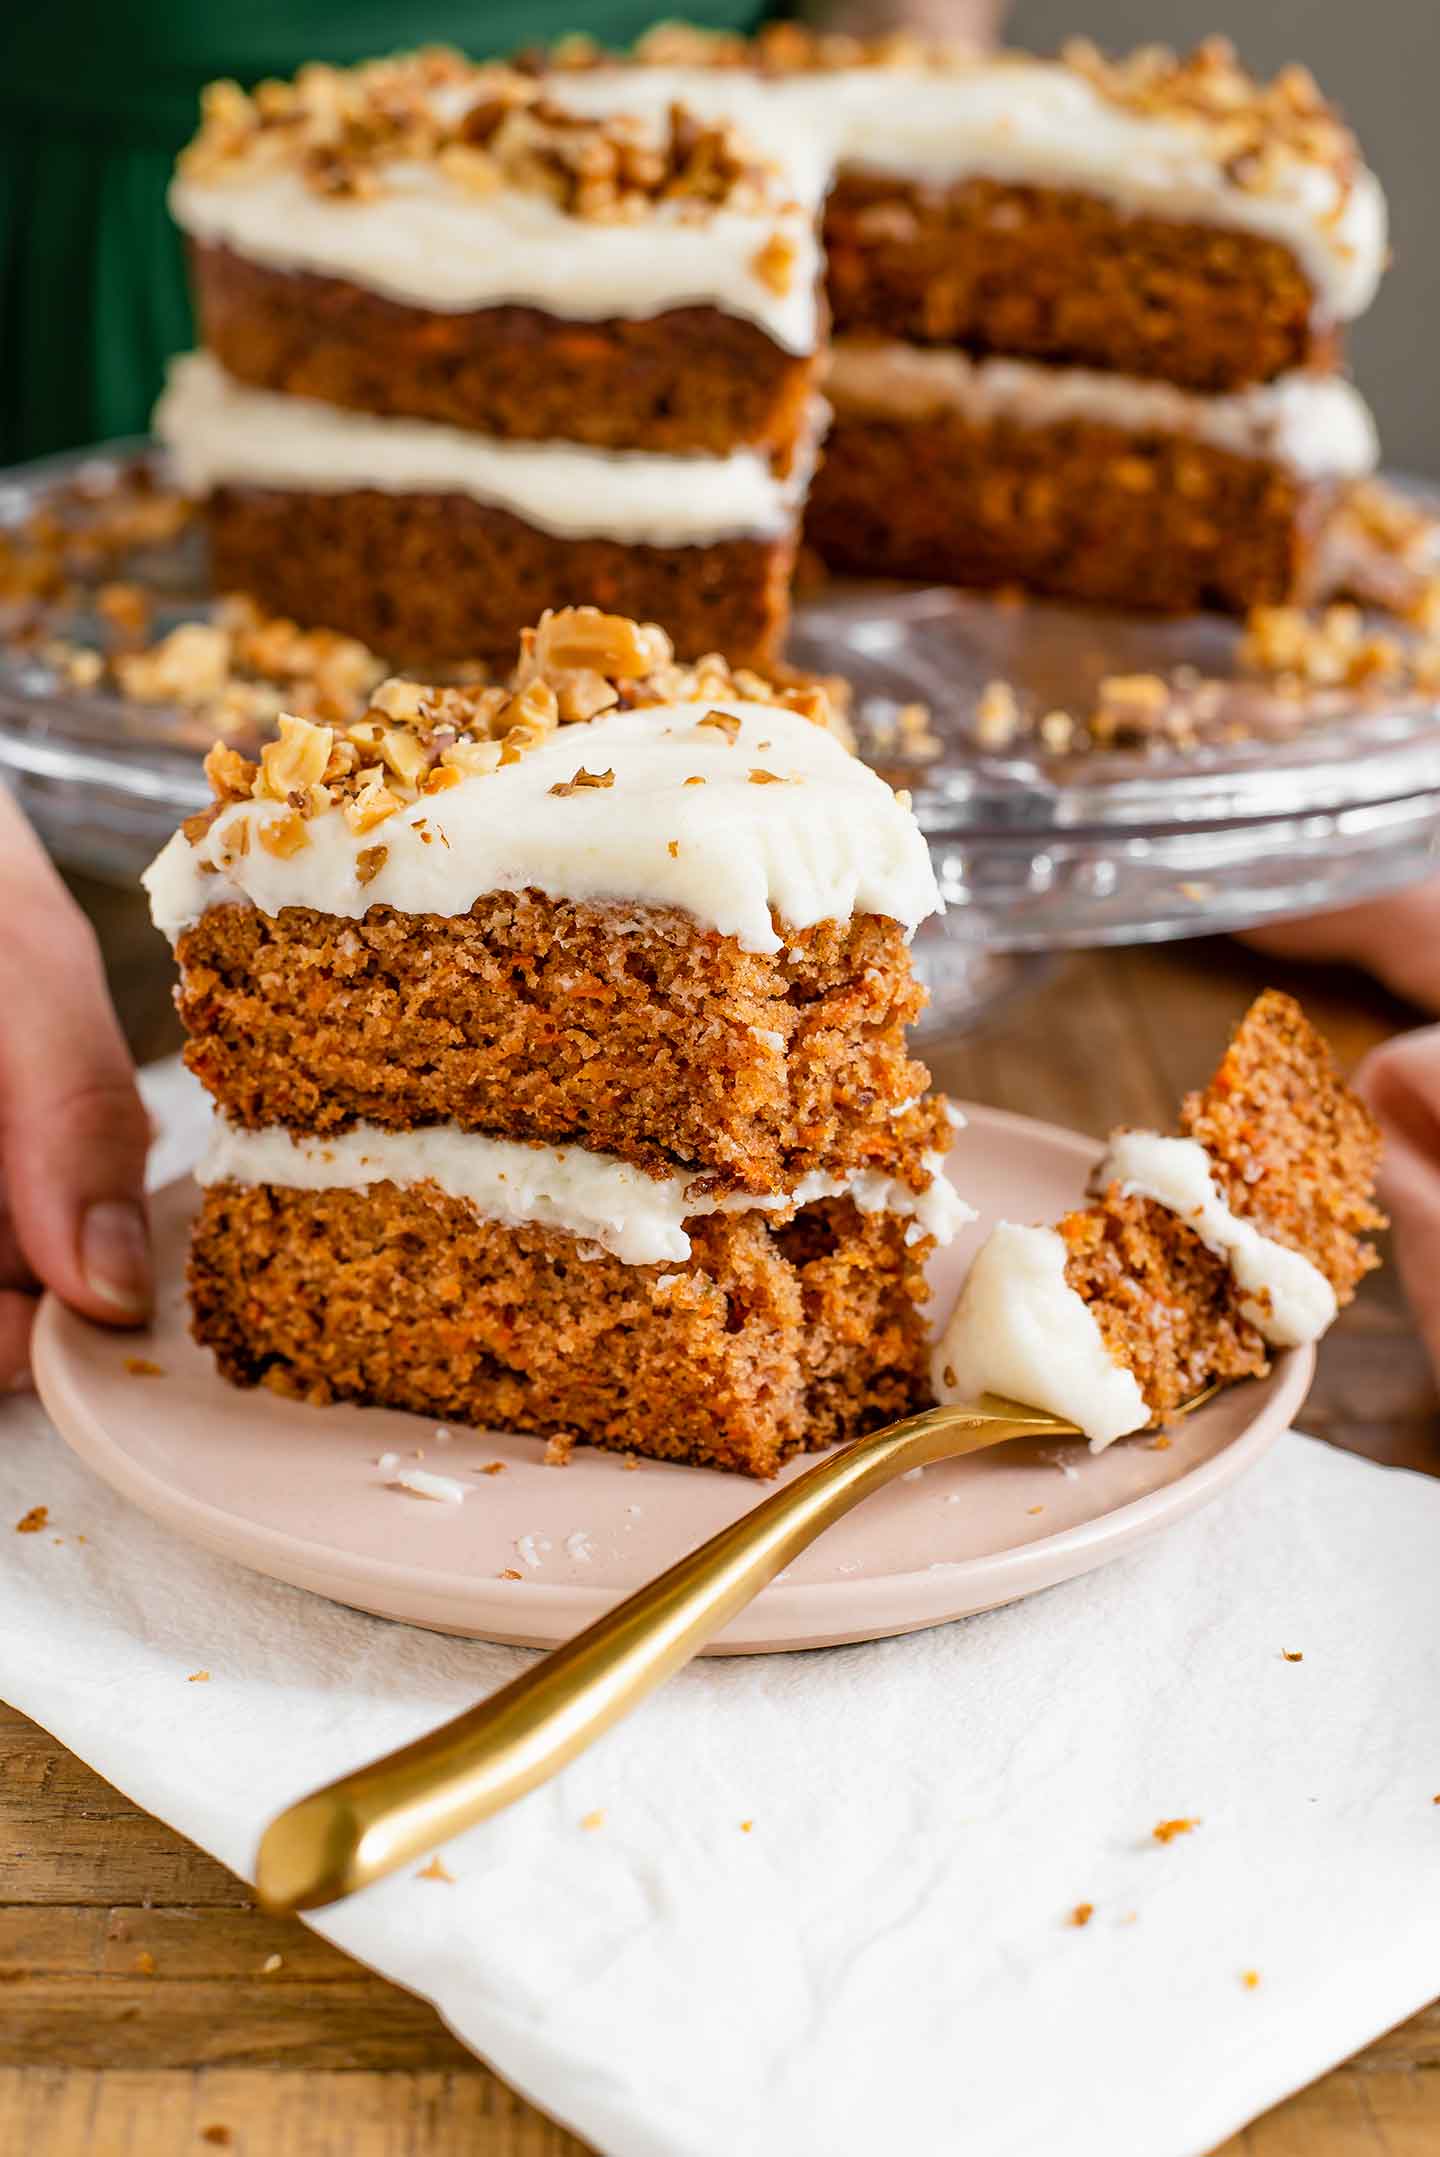 Side view of a large slice of a two tiered carrot cake with cream cheese frosting. A fork has sliced through the piece and lays on the plate.